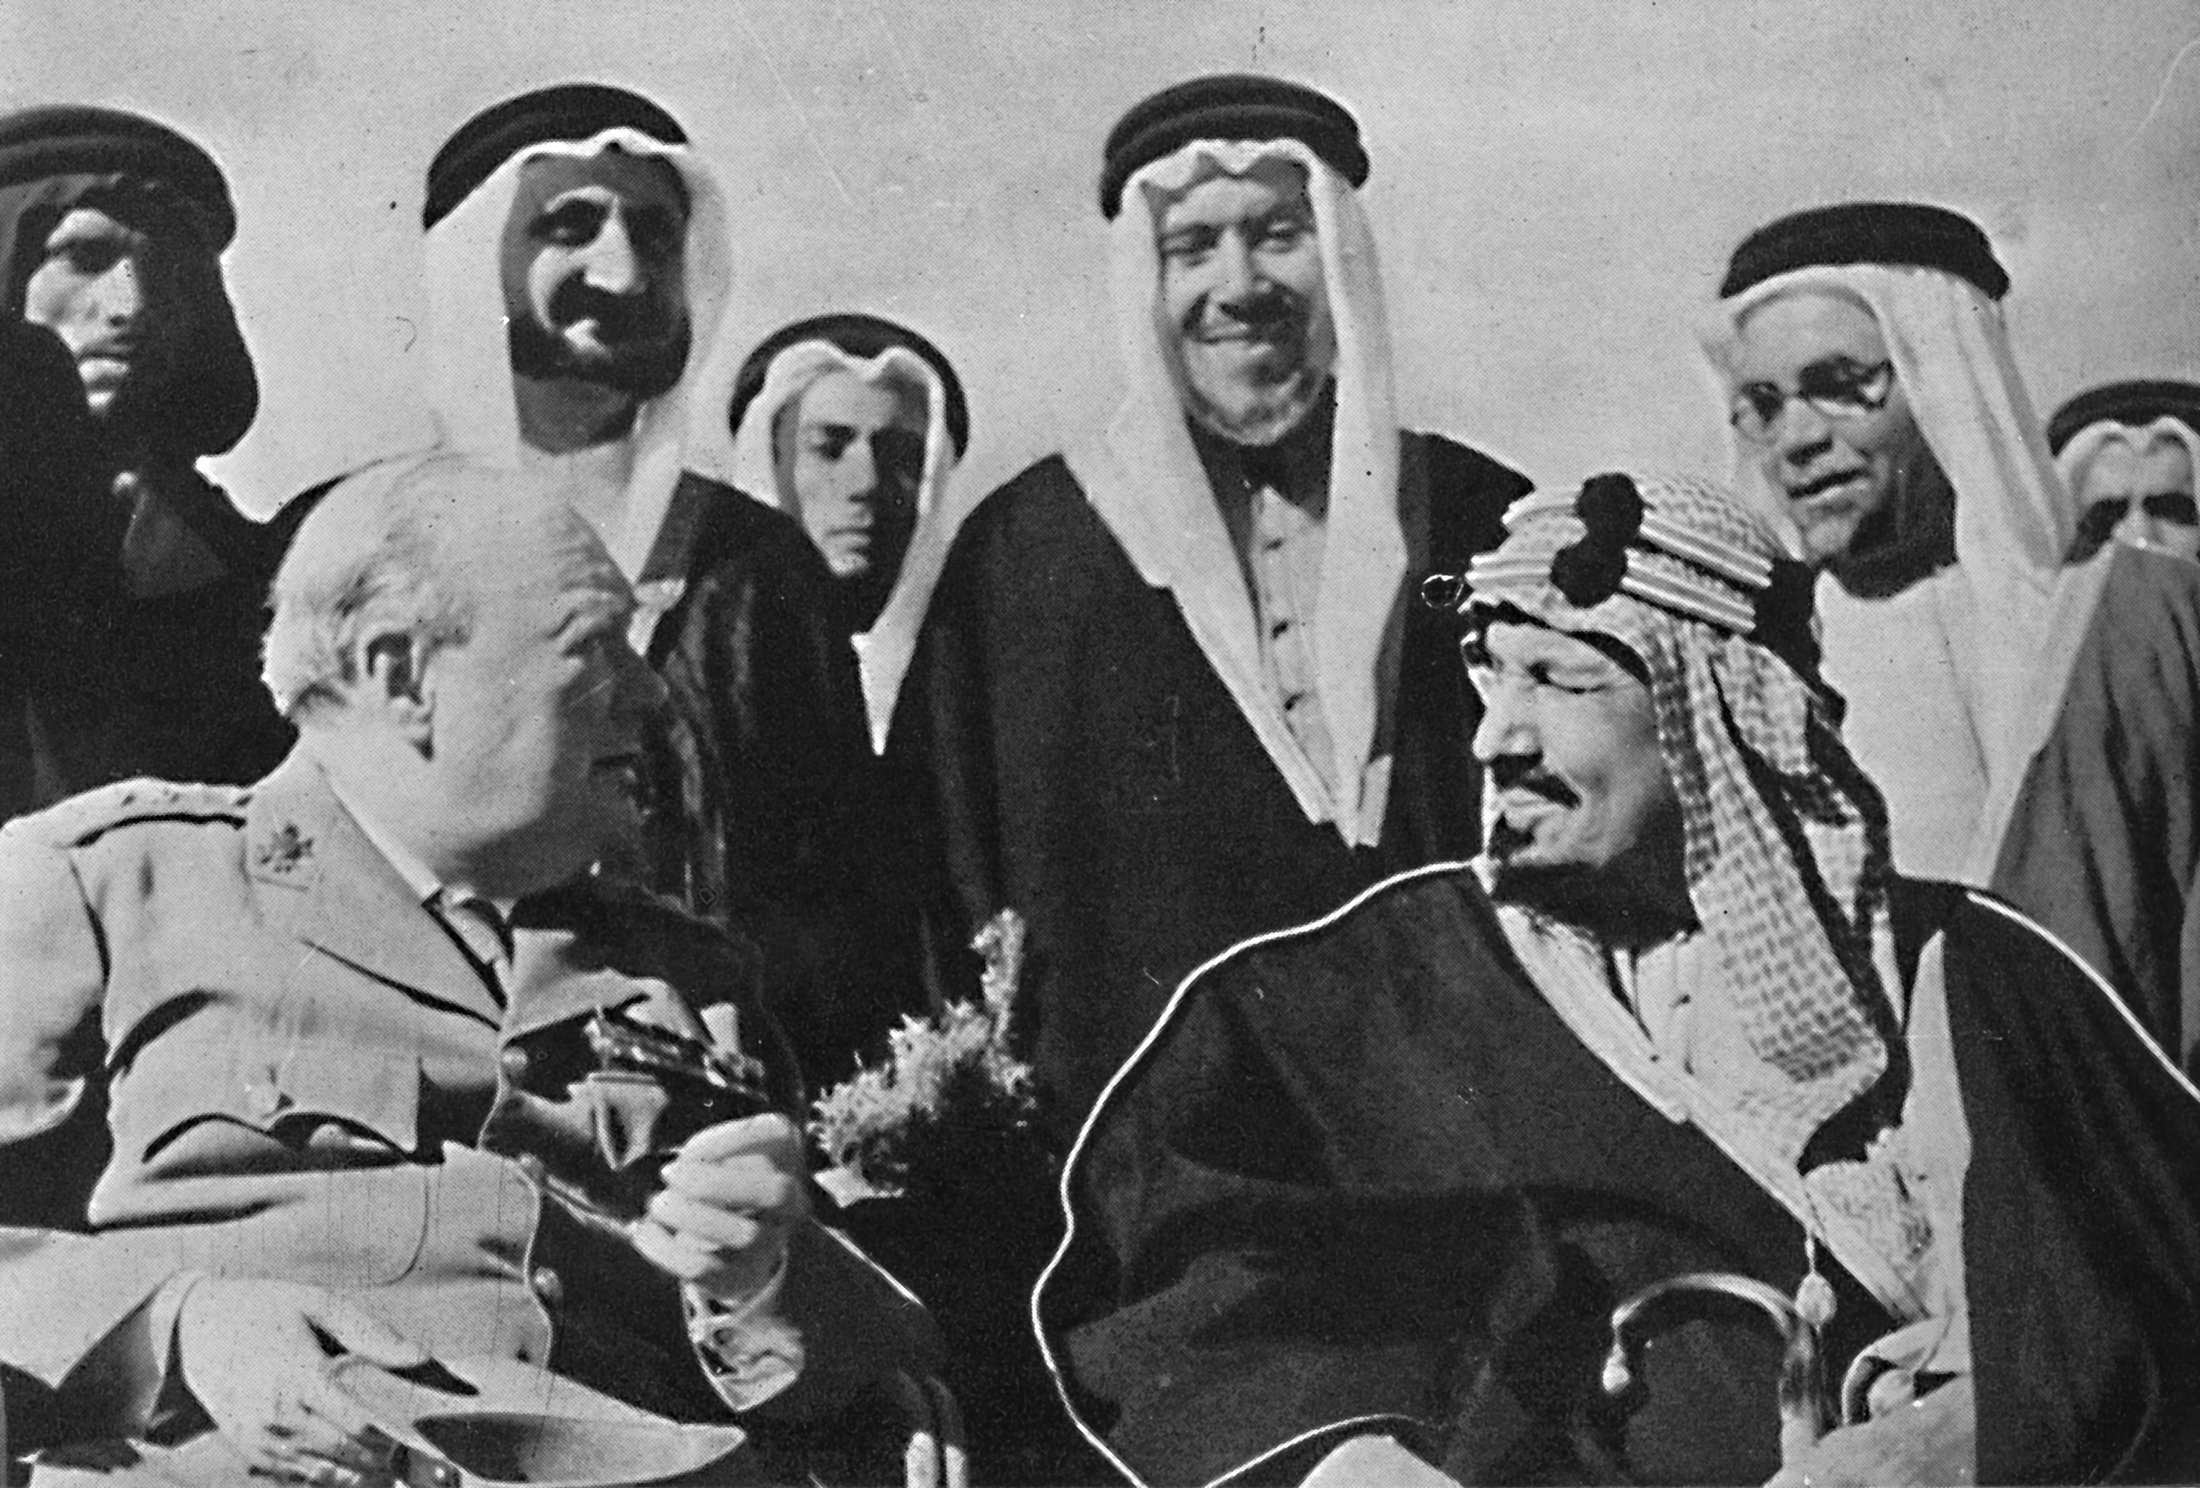 Winston Churchill (foreground L) talks with Middle Eastern rulers, including King Abdulaziz bin Abdul Rahman Al Saud (foreground R) of Saudi Arabia, in the Grand Hotel du Lac, south of Cairo, Egypt, February 1945. (Getty Images)